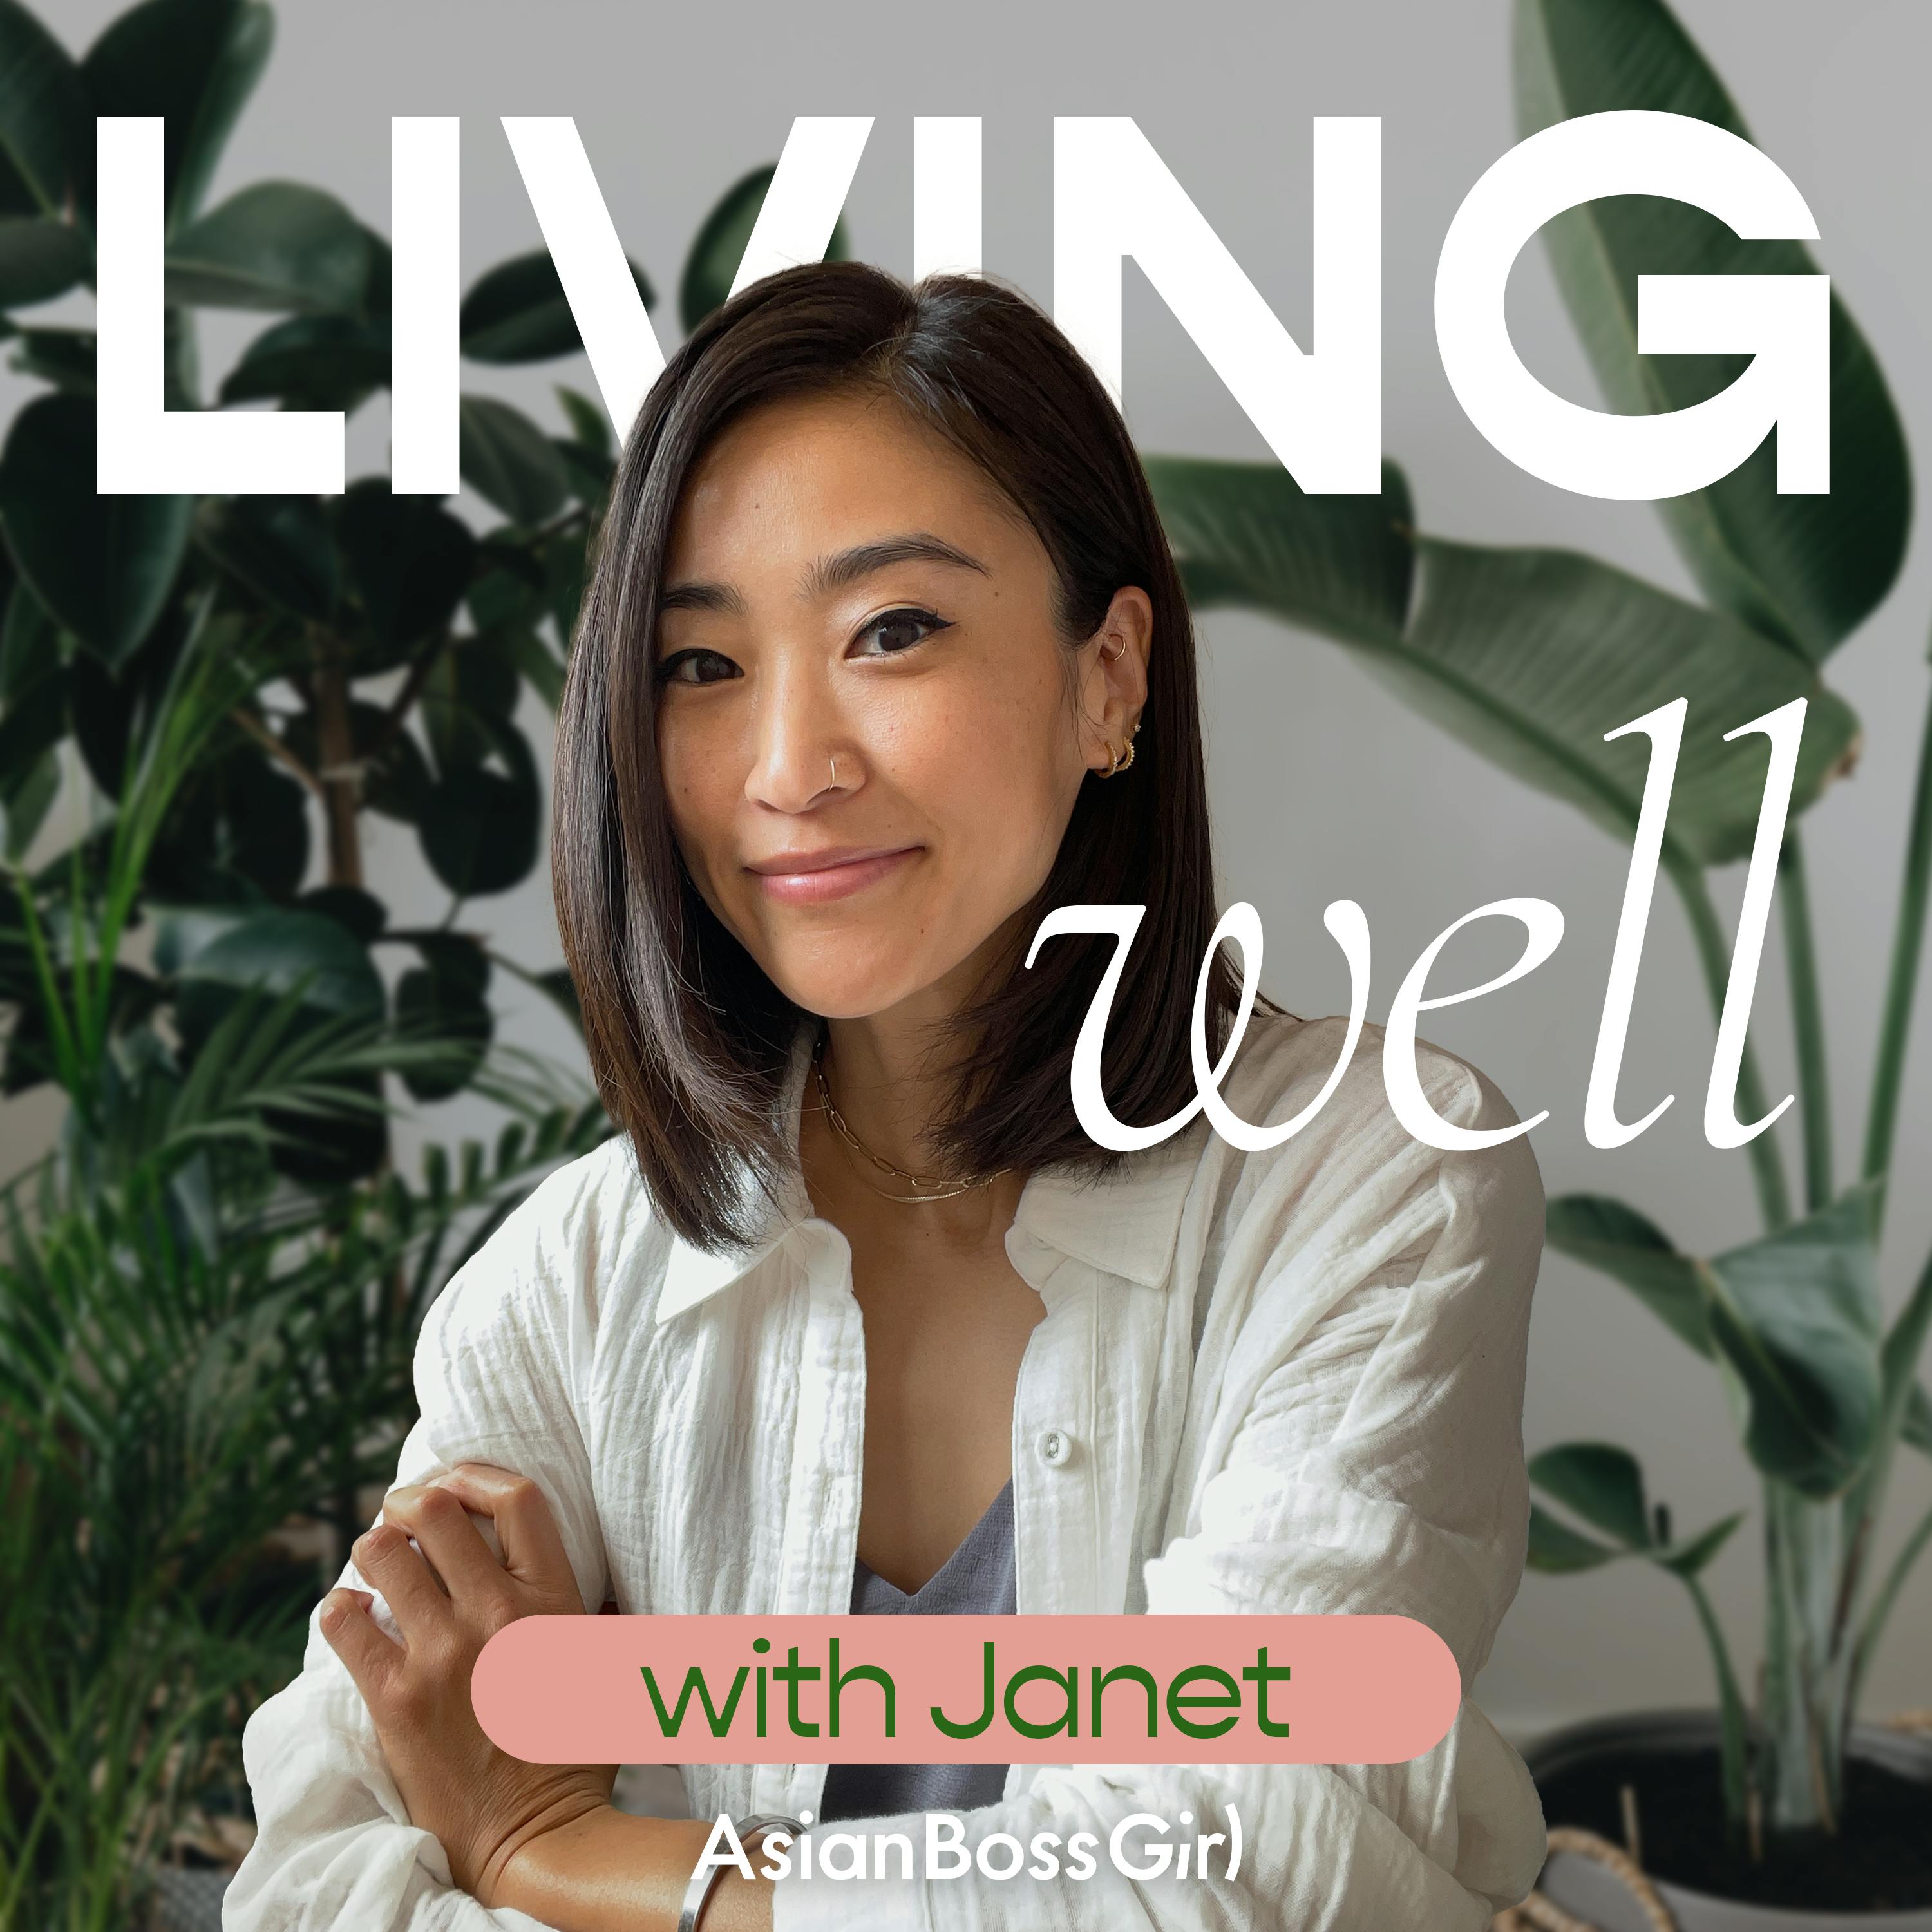 Living Well with Janet: Stress, Burnout, Imposter Syndrome, and More - Wellness Tools 101 with Neelu Kaur